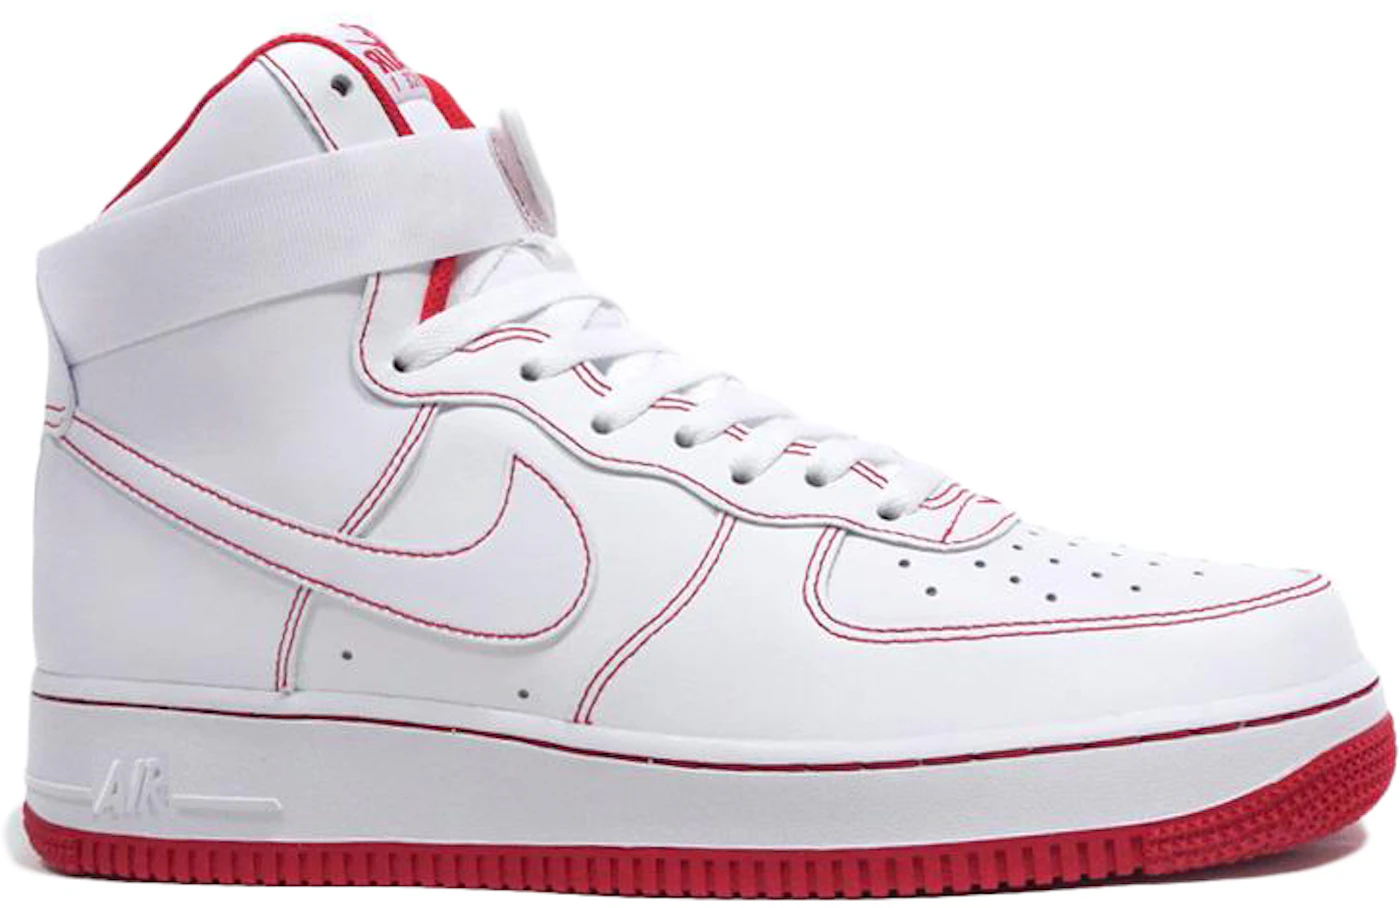 Nike Air Force 1 High '07 University Red